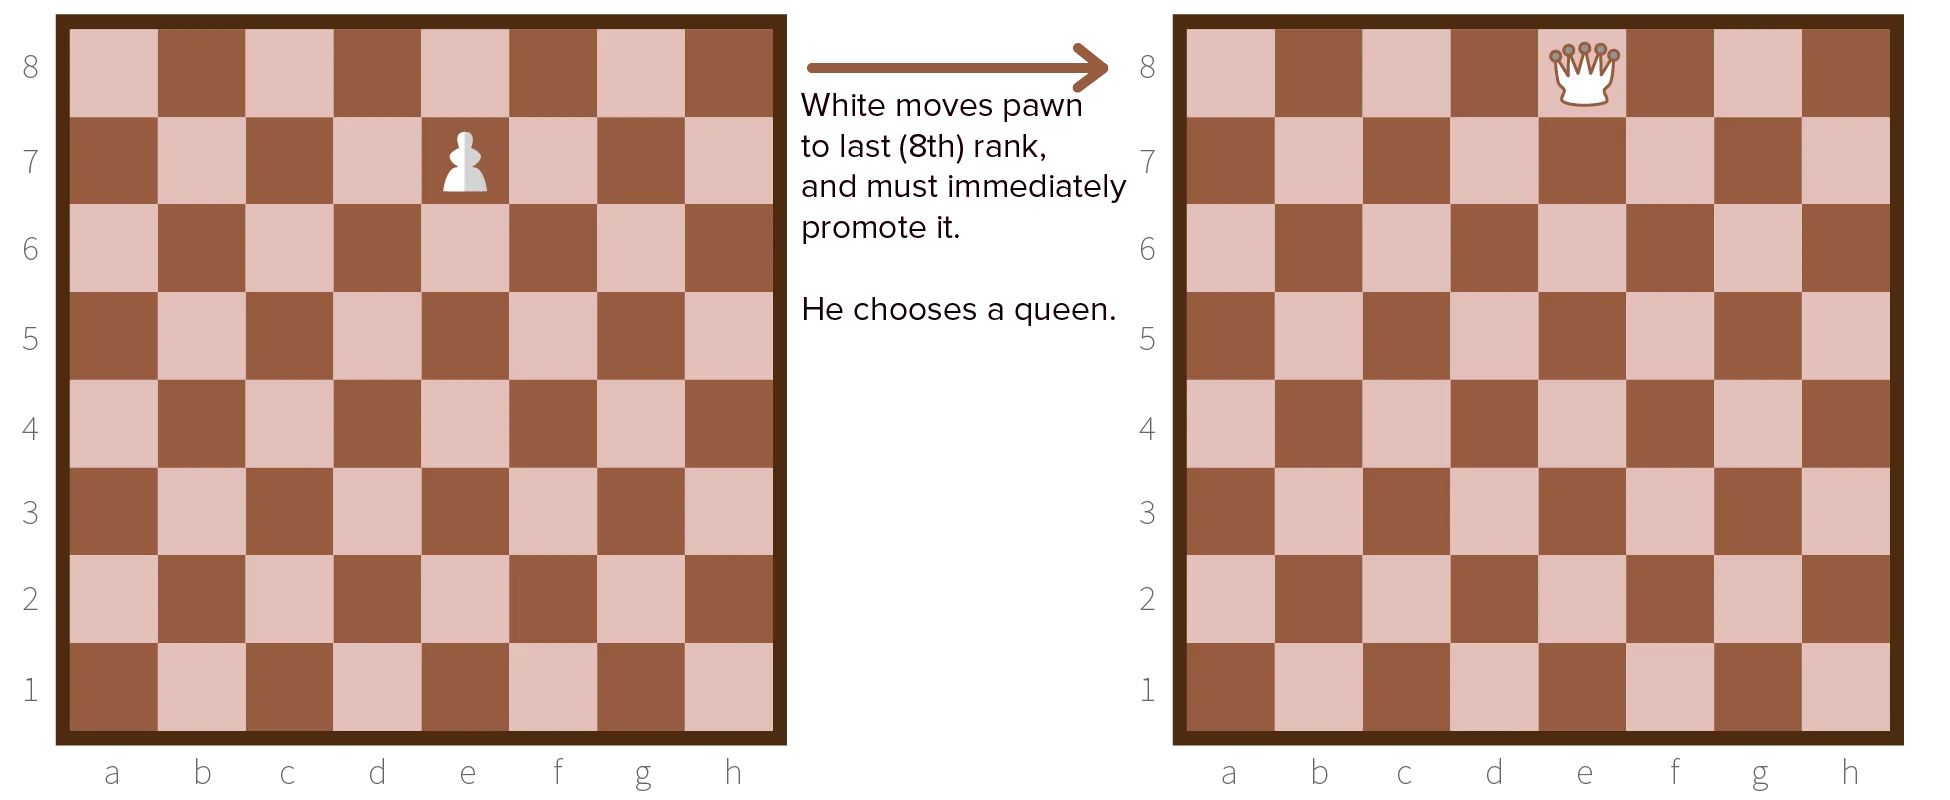 Example of promoting pawns in chess.